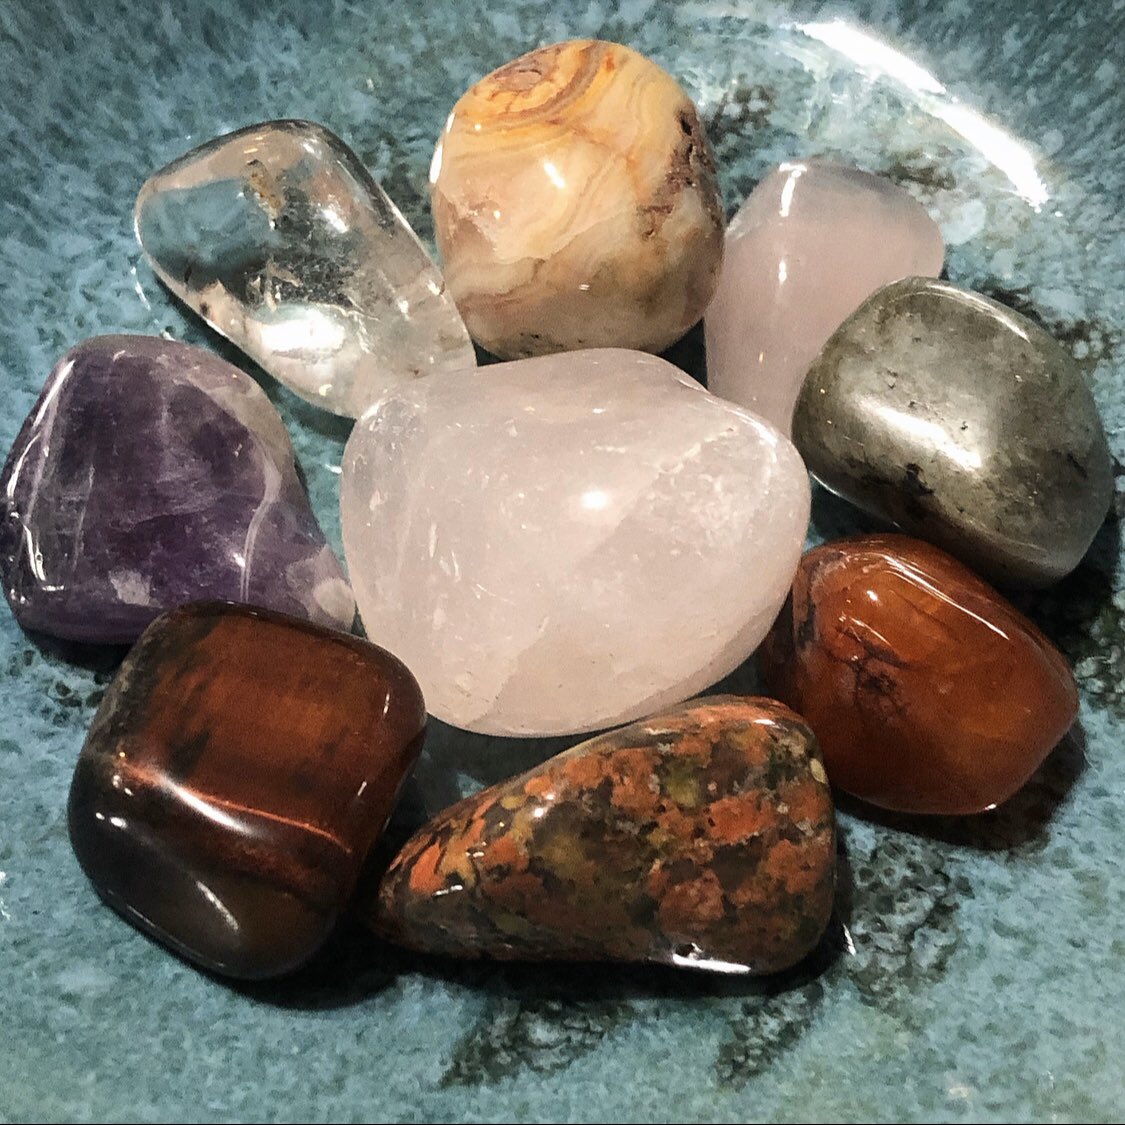 Memorial Day Specials    ends 5.26.2020    at midnight PST Gemstone bundles, mystery pendants with the purchase of a zodiac pendant, 3 for $37 simple twists, and 2 for $25 minis!(a thread)